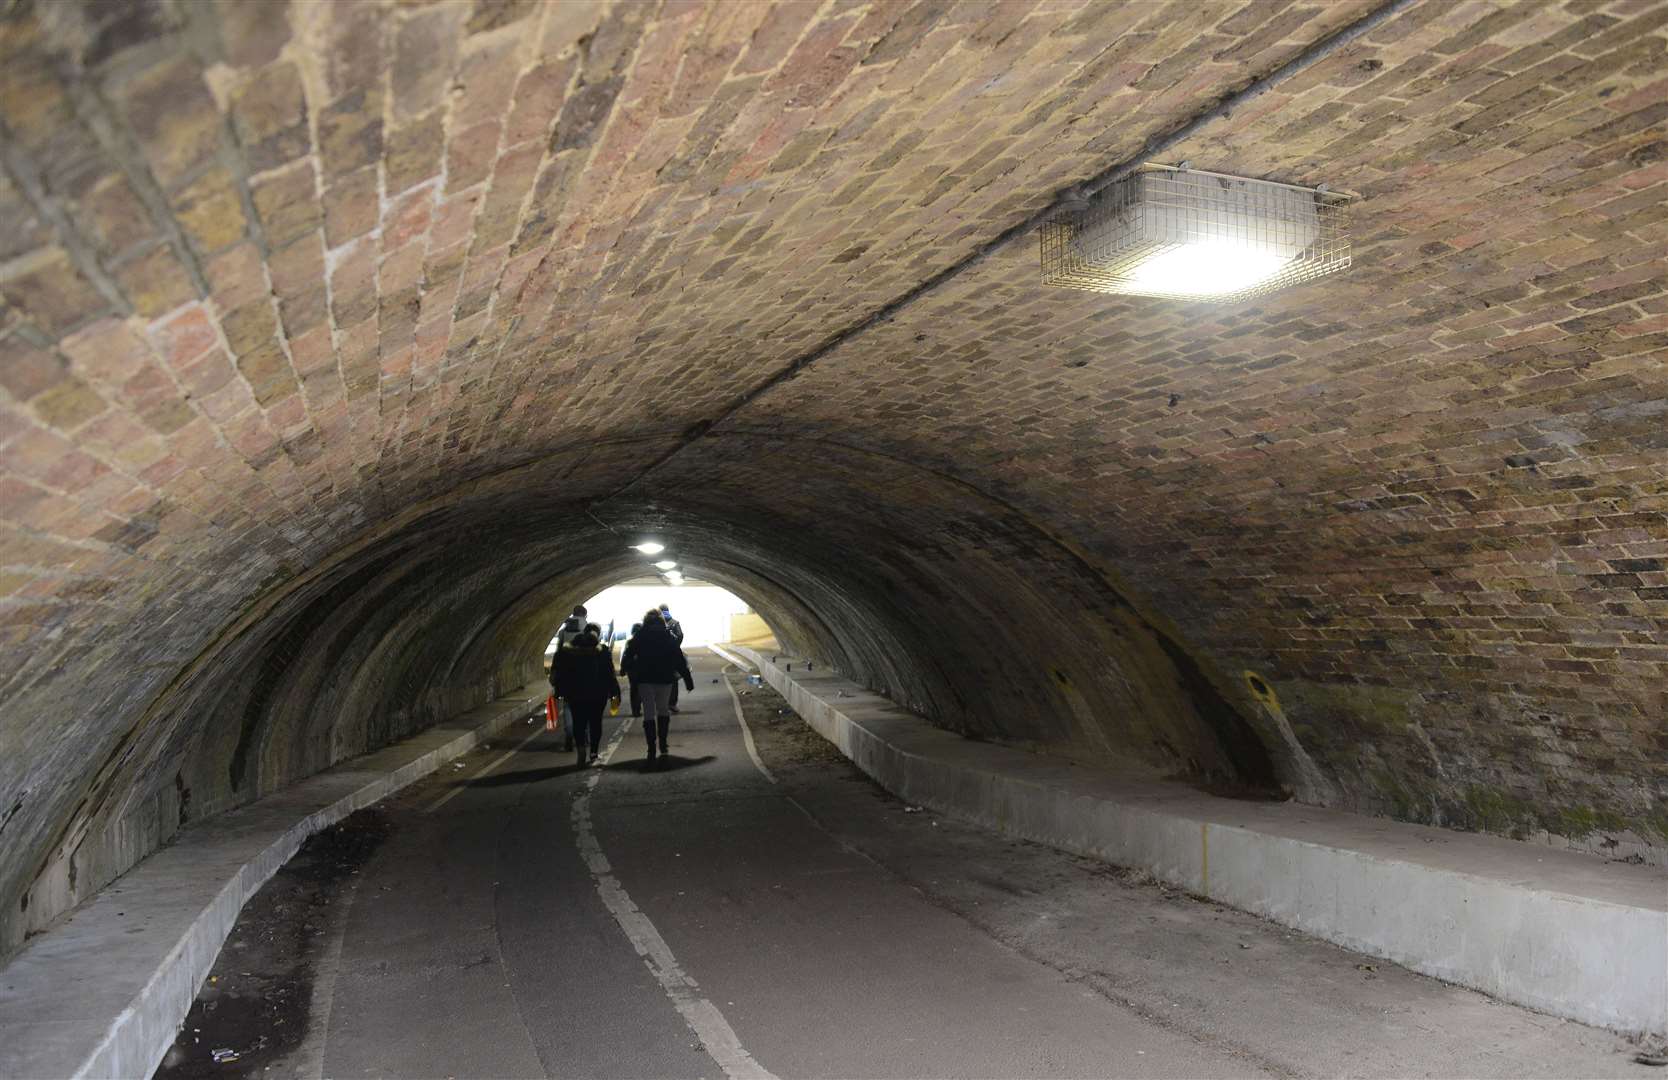 The Ashford Construction Focus Group wanted to improve the link between the town centre and the Designer Outlet; pedestrians currently have to use this underpass beneath the railway line